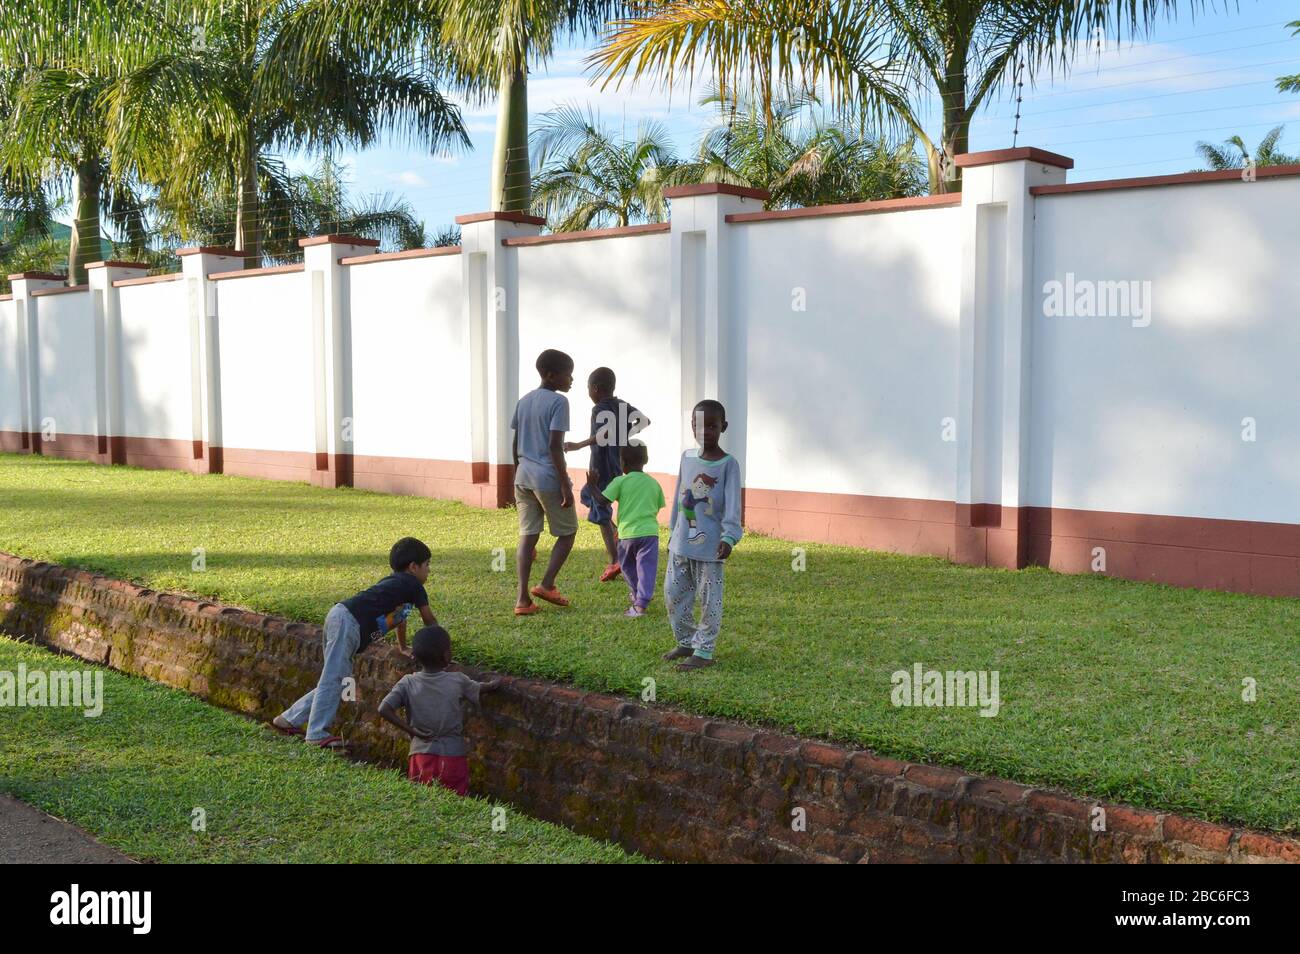 LILONGWE, MALAWI, AFRICA - APRIL 2, 2018: Local children are plaing on the ground with bright green grass near white fence and palms, one boy is smili Stock Photo